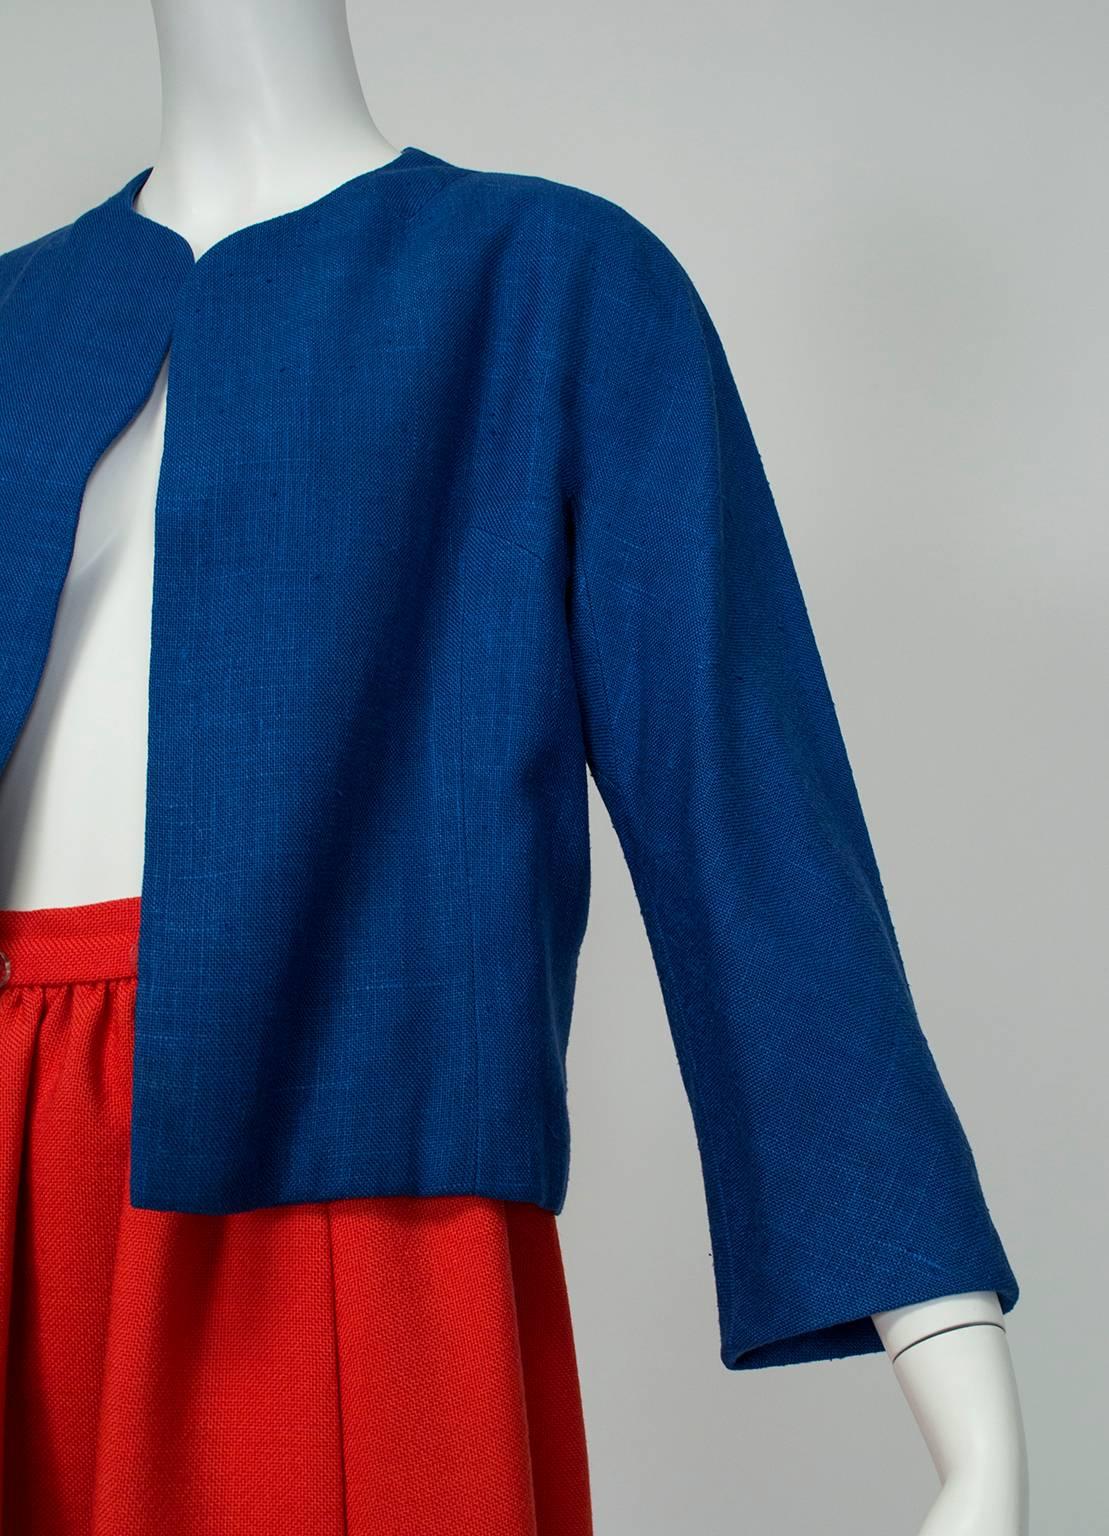 Purple Pauline Trigère Marine Blue Collarless Crop Jacket with Red Lining - M, 1960s For Sale